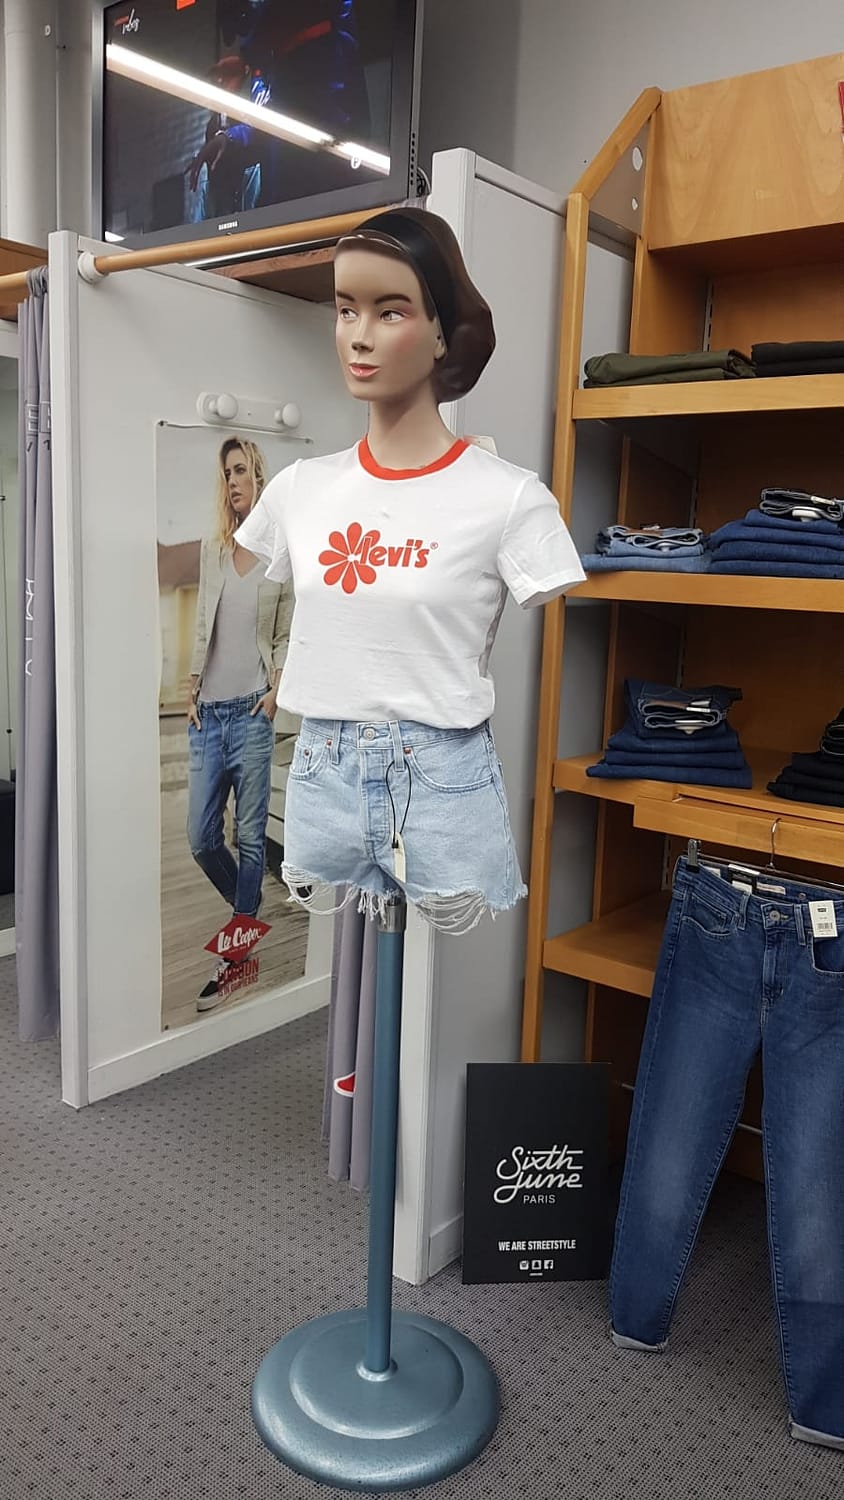 American Store jeans tshirt Chateauroux